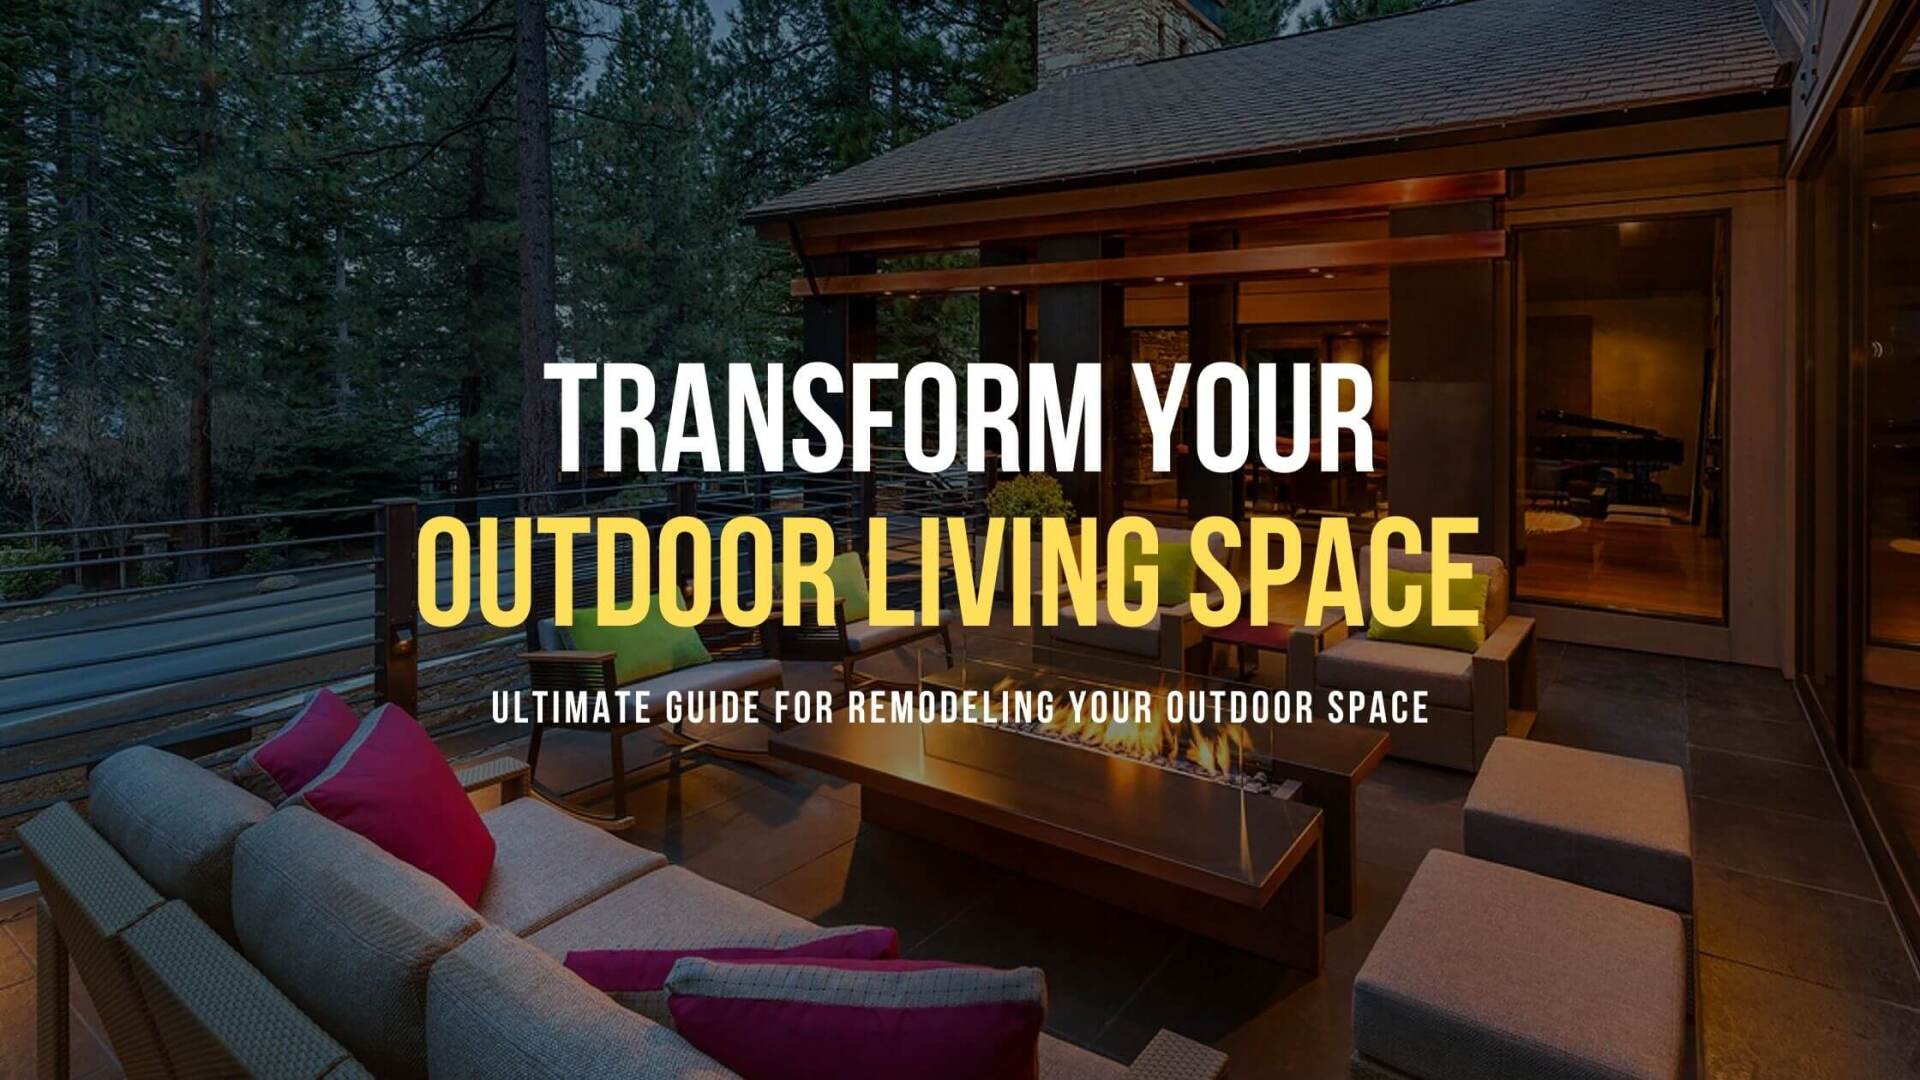 Top 6 ways to transform your Outdoor Living Space